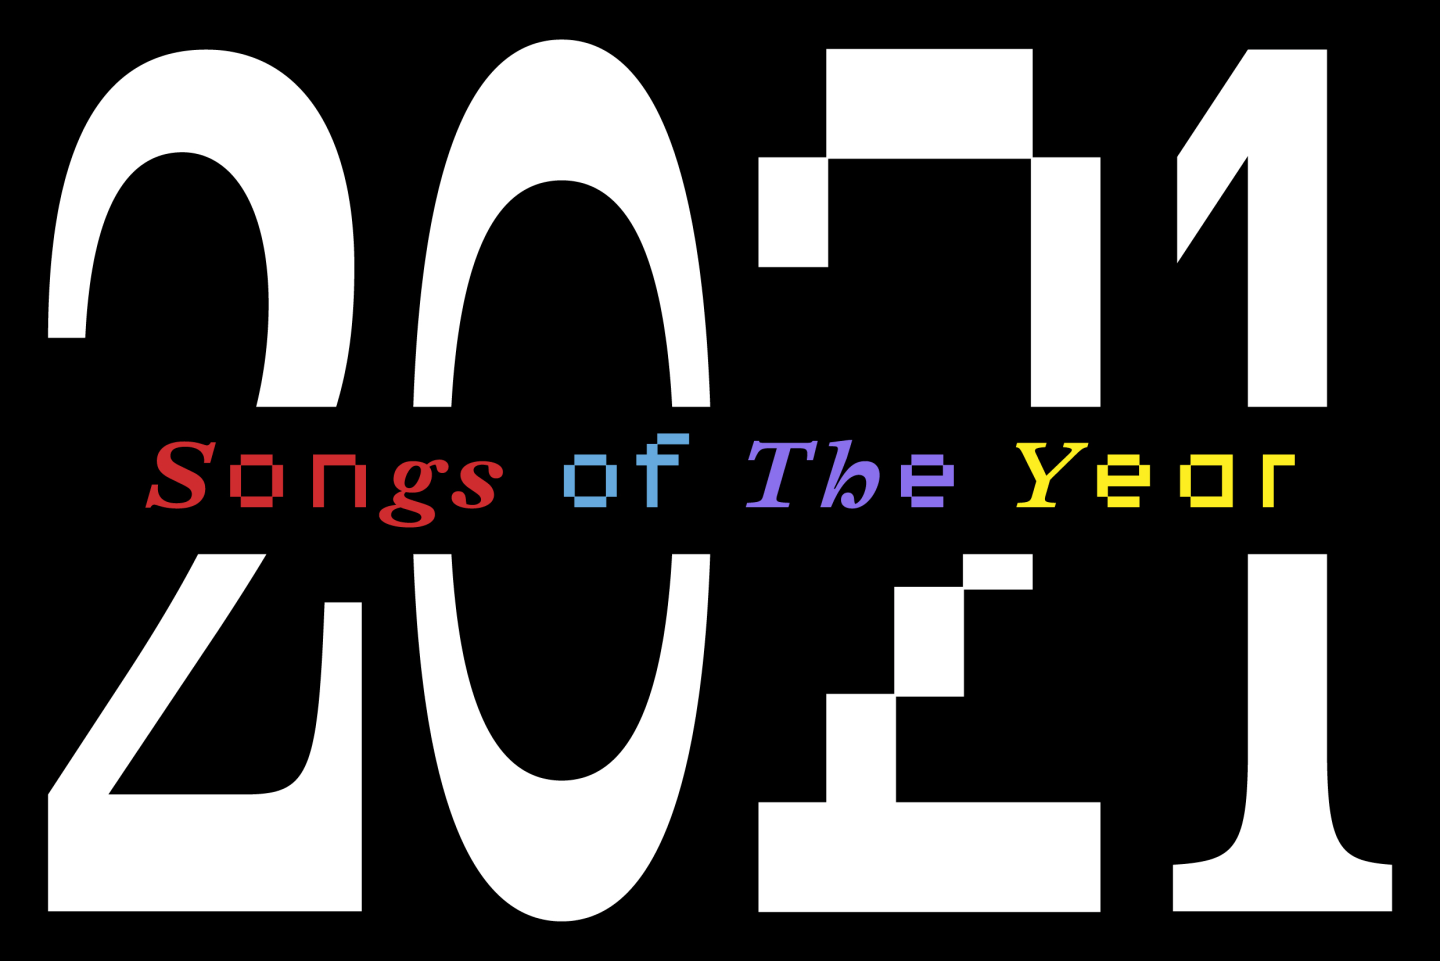 The 100 best songs of 2021